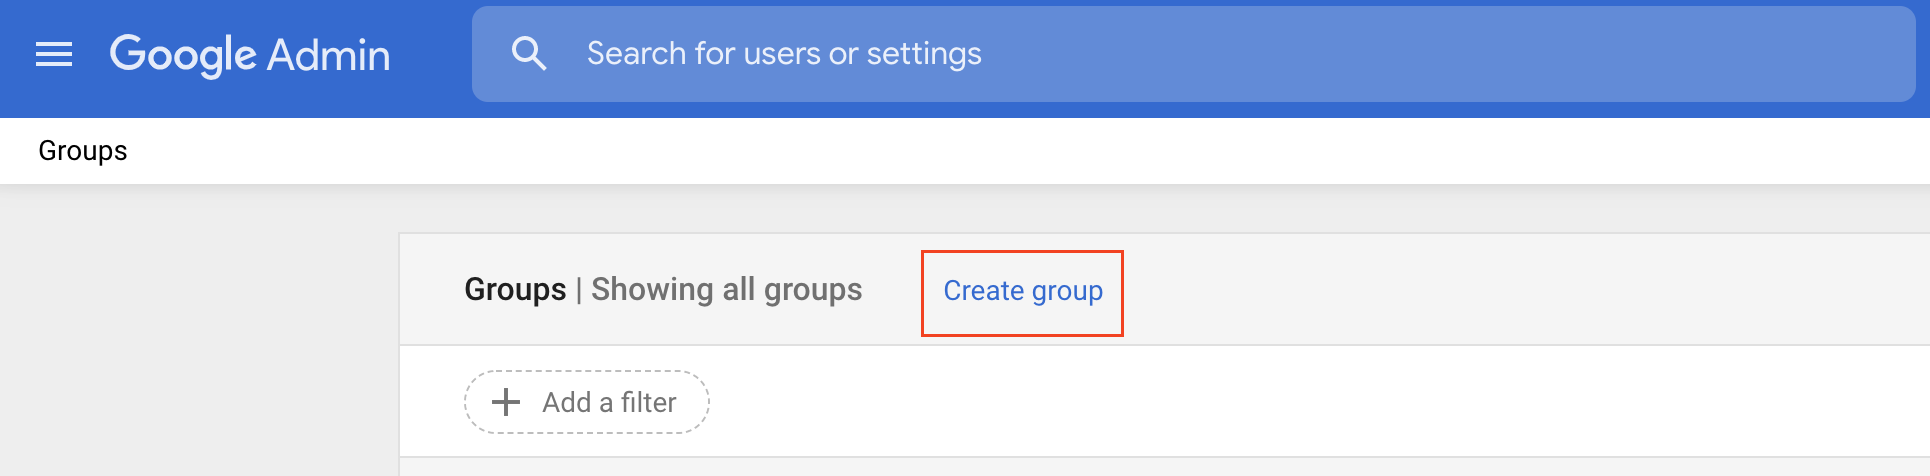 Creating a group in Google Groups